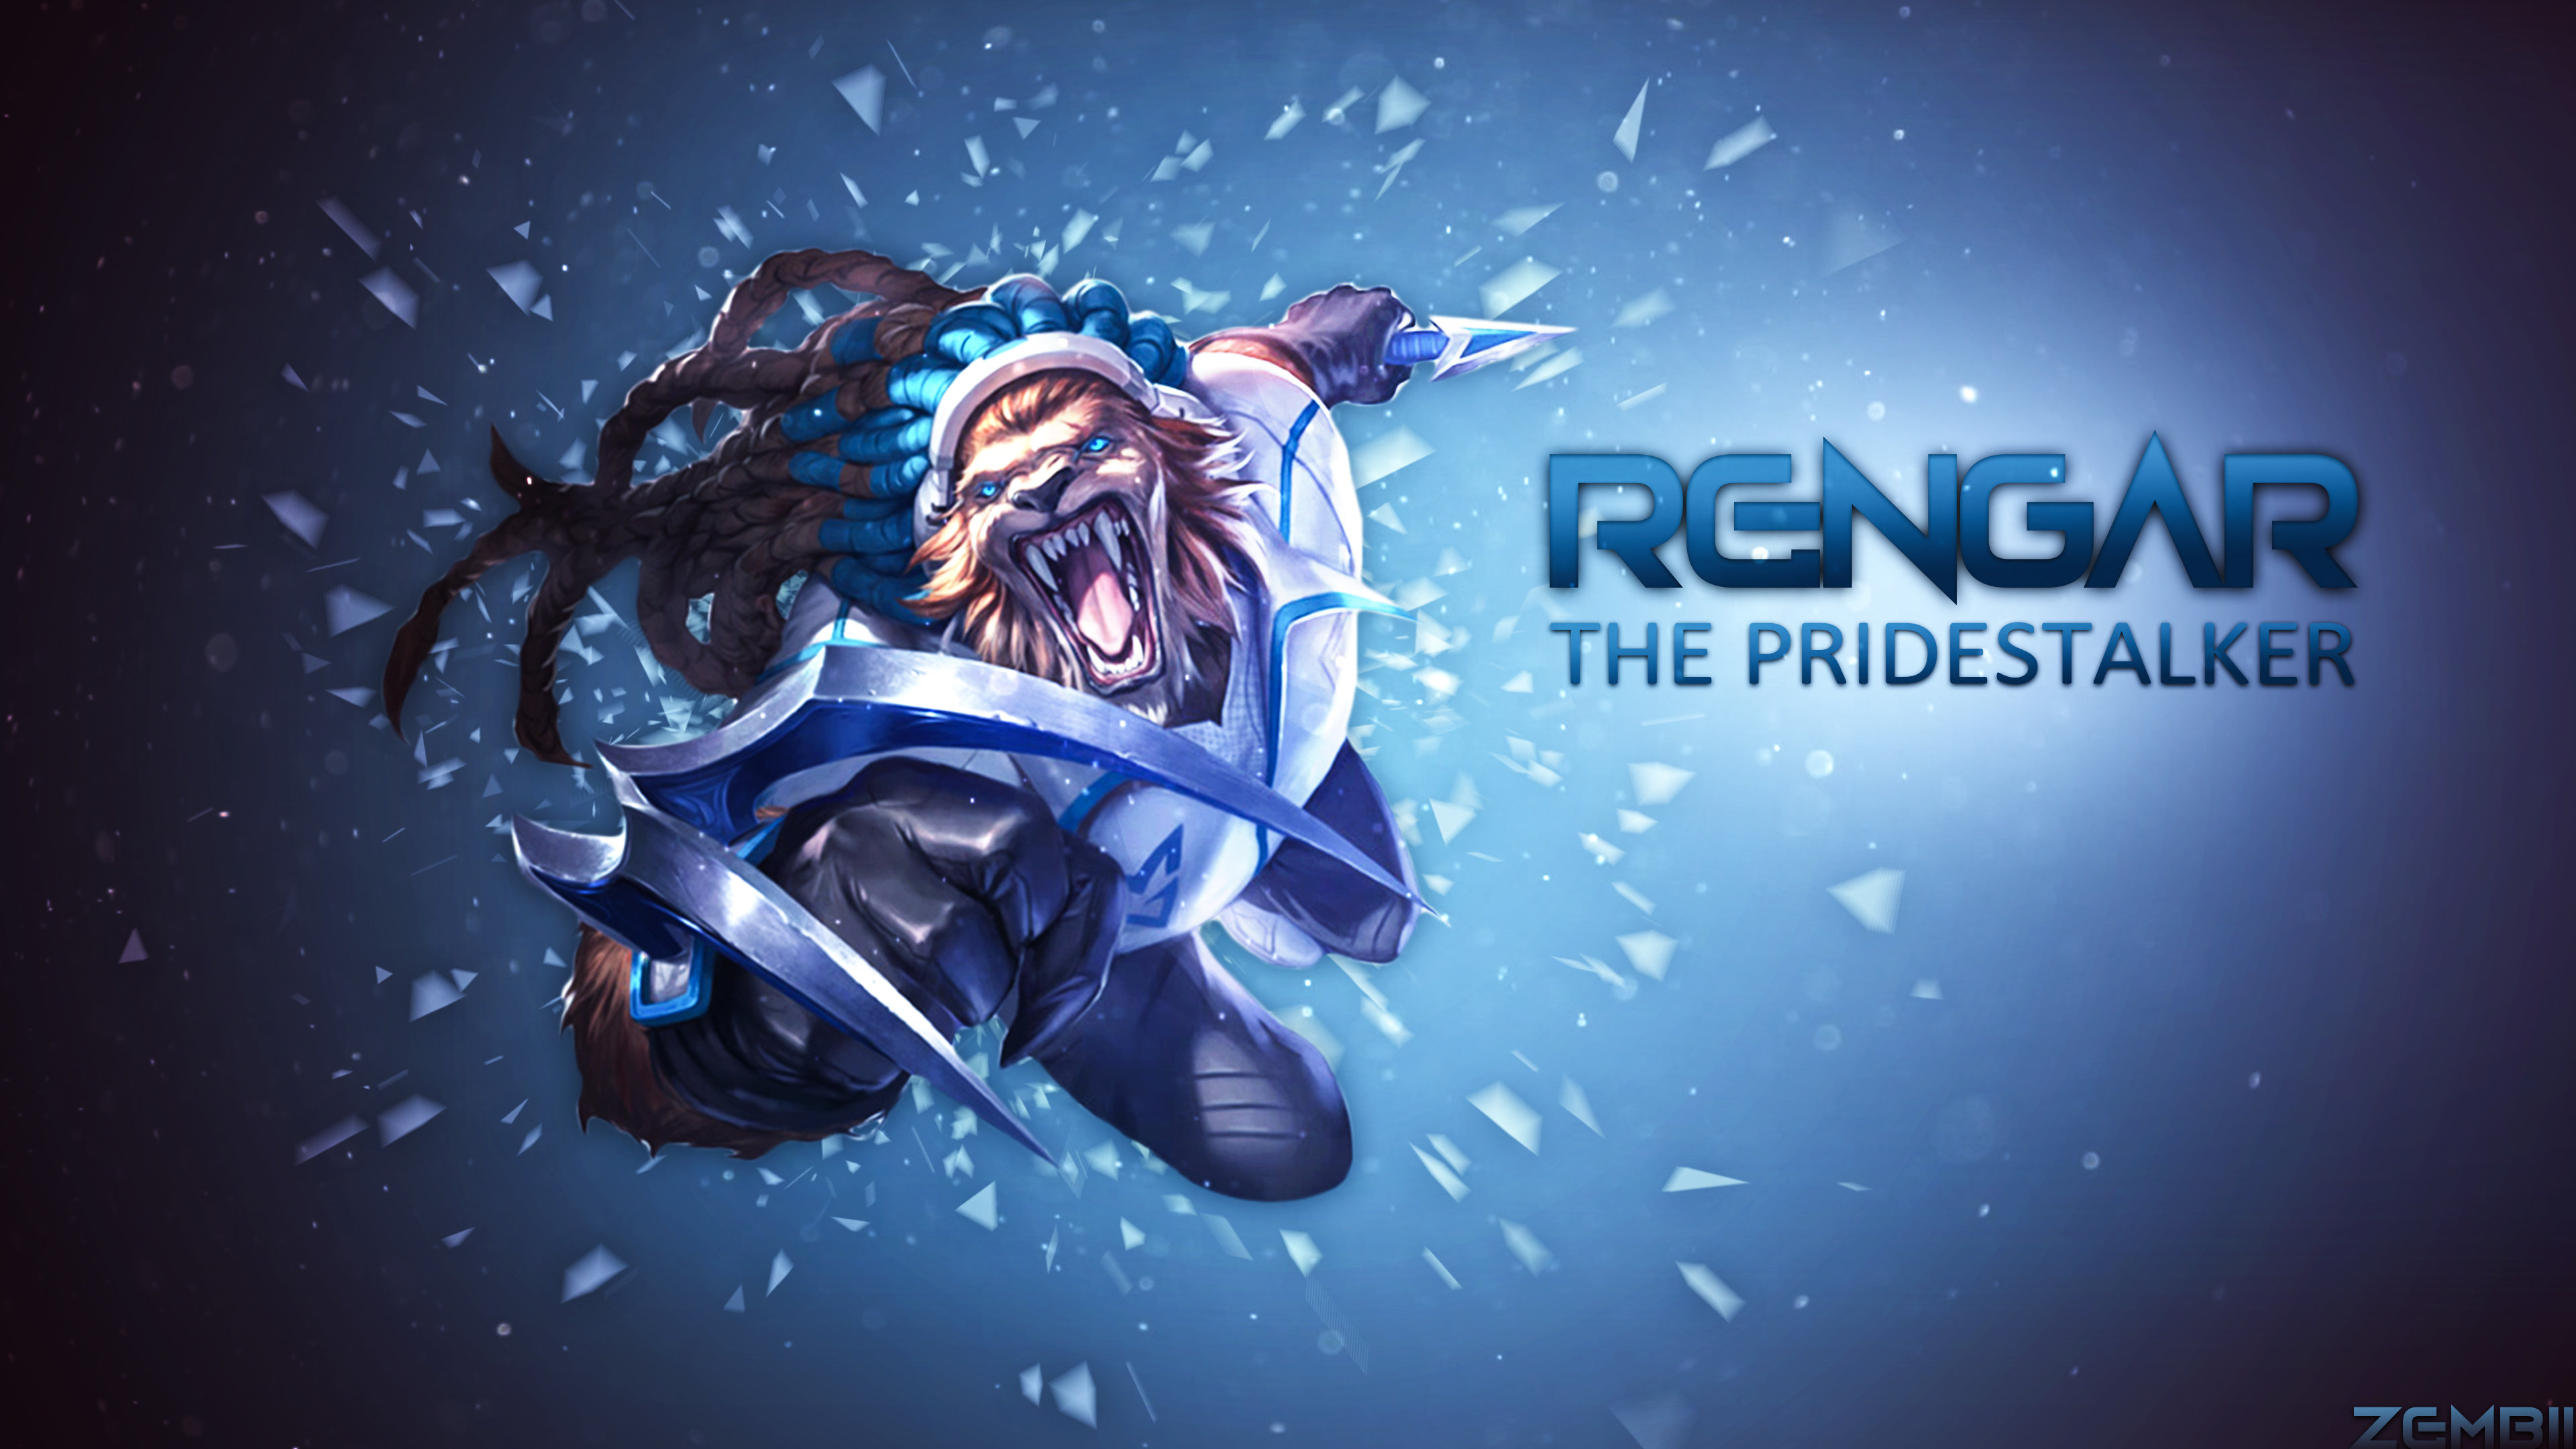 Free Download Rengar Background Id - Graphic Design , HD Wallpaper & Backgrounds